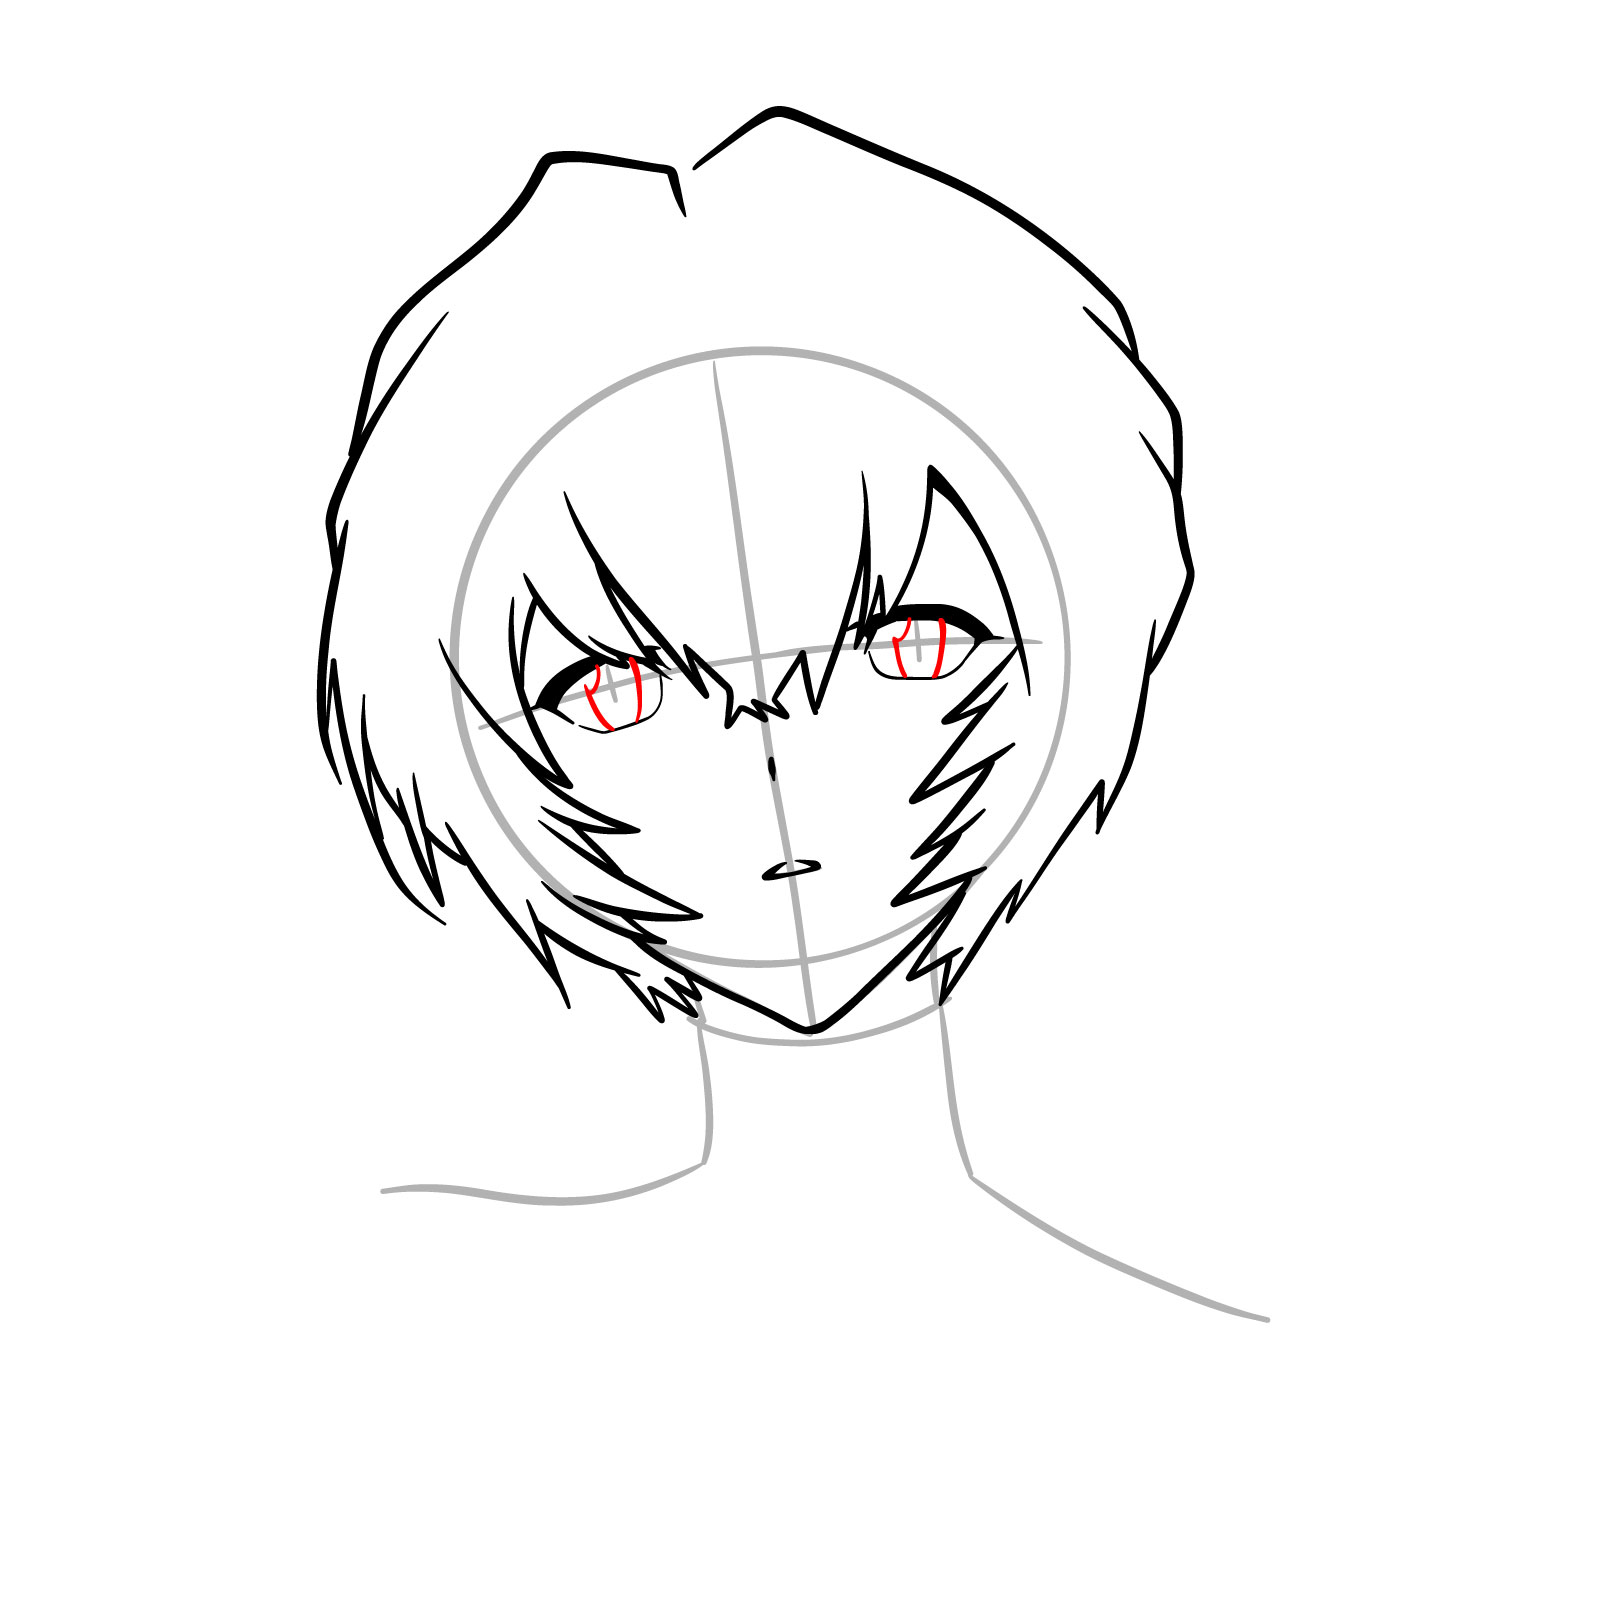 How to draw Rei Ayanami's face - Evangelion - step 11